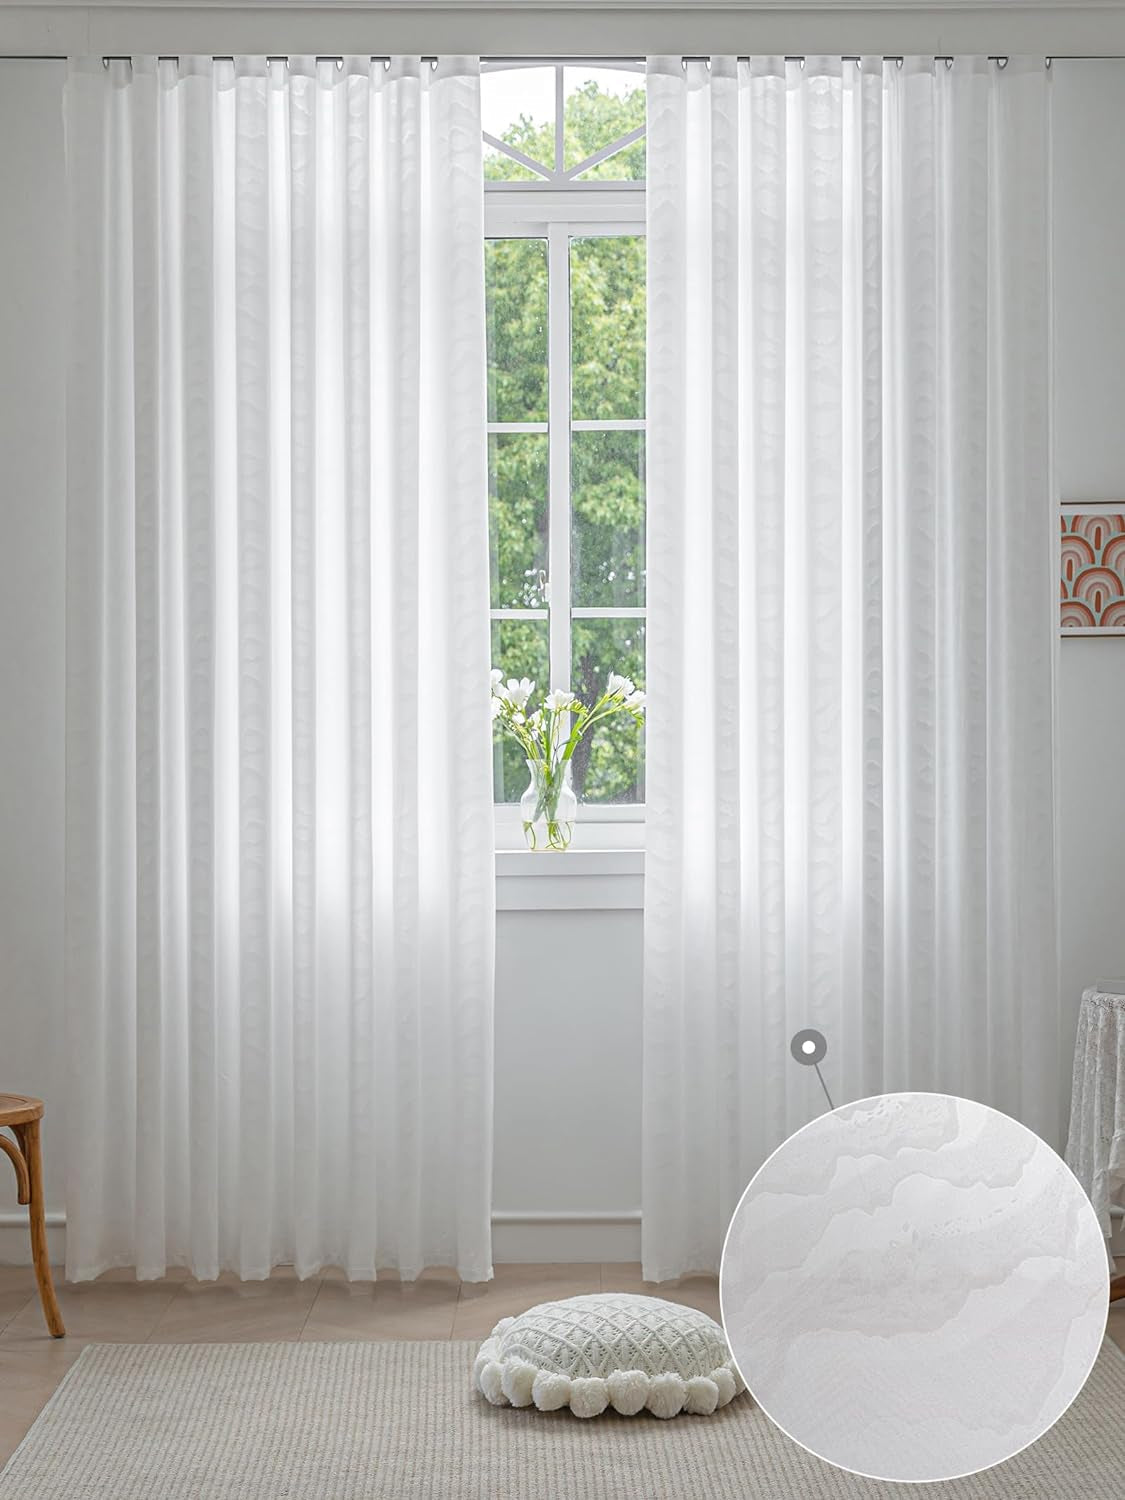 Avigers White Cloud Pattern Sheer Curtains for Living Room 84 Inch Length 2 Panels Set, Grommet Top Semitransparent Balance Privacy & Light Vertical Sheer Drapes for Bedroom, W52 X L84